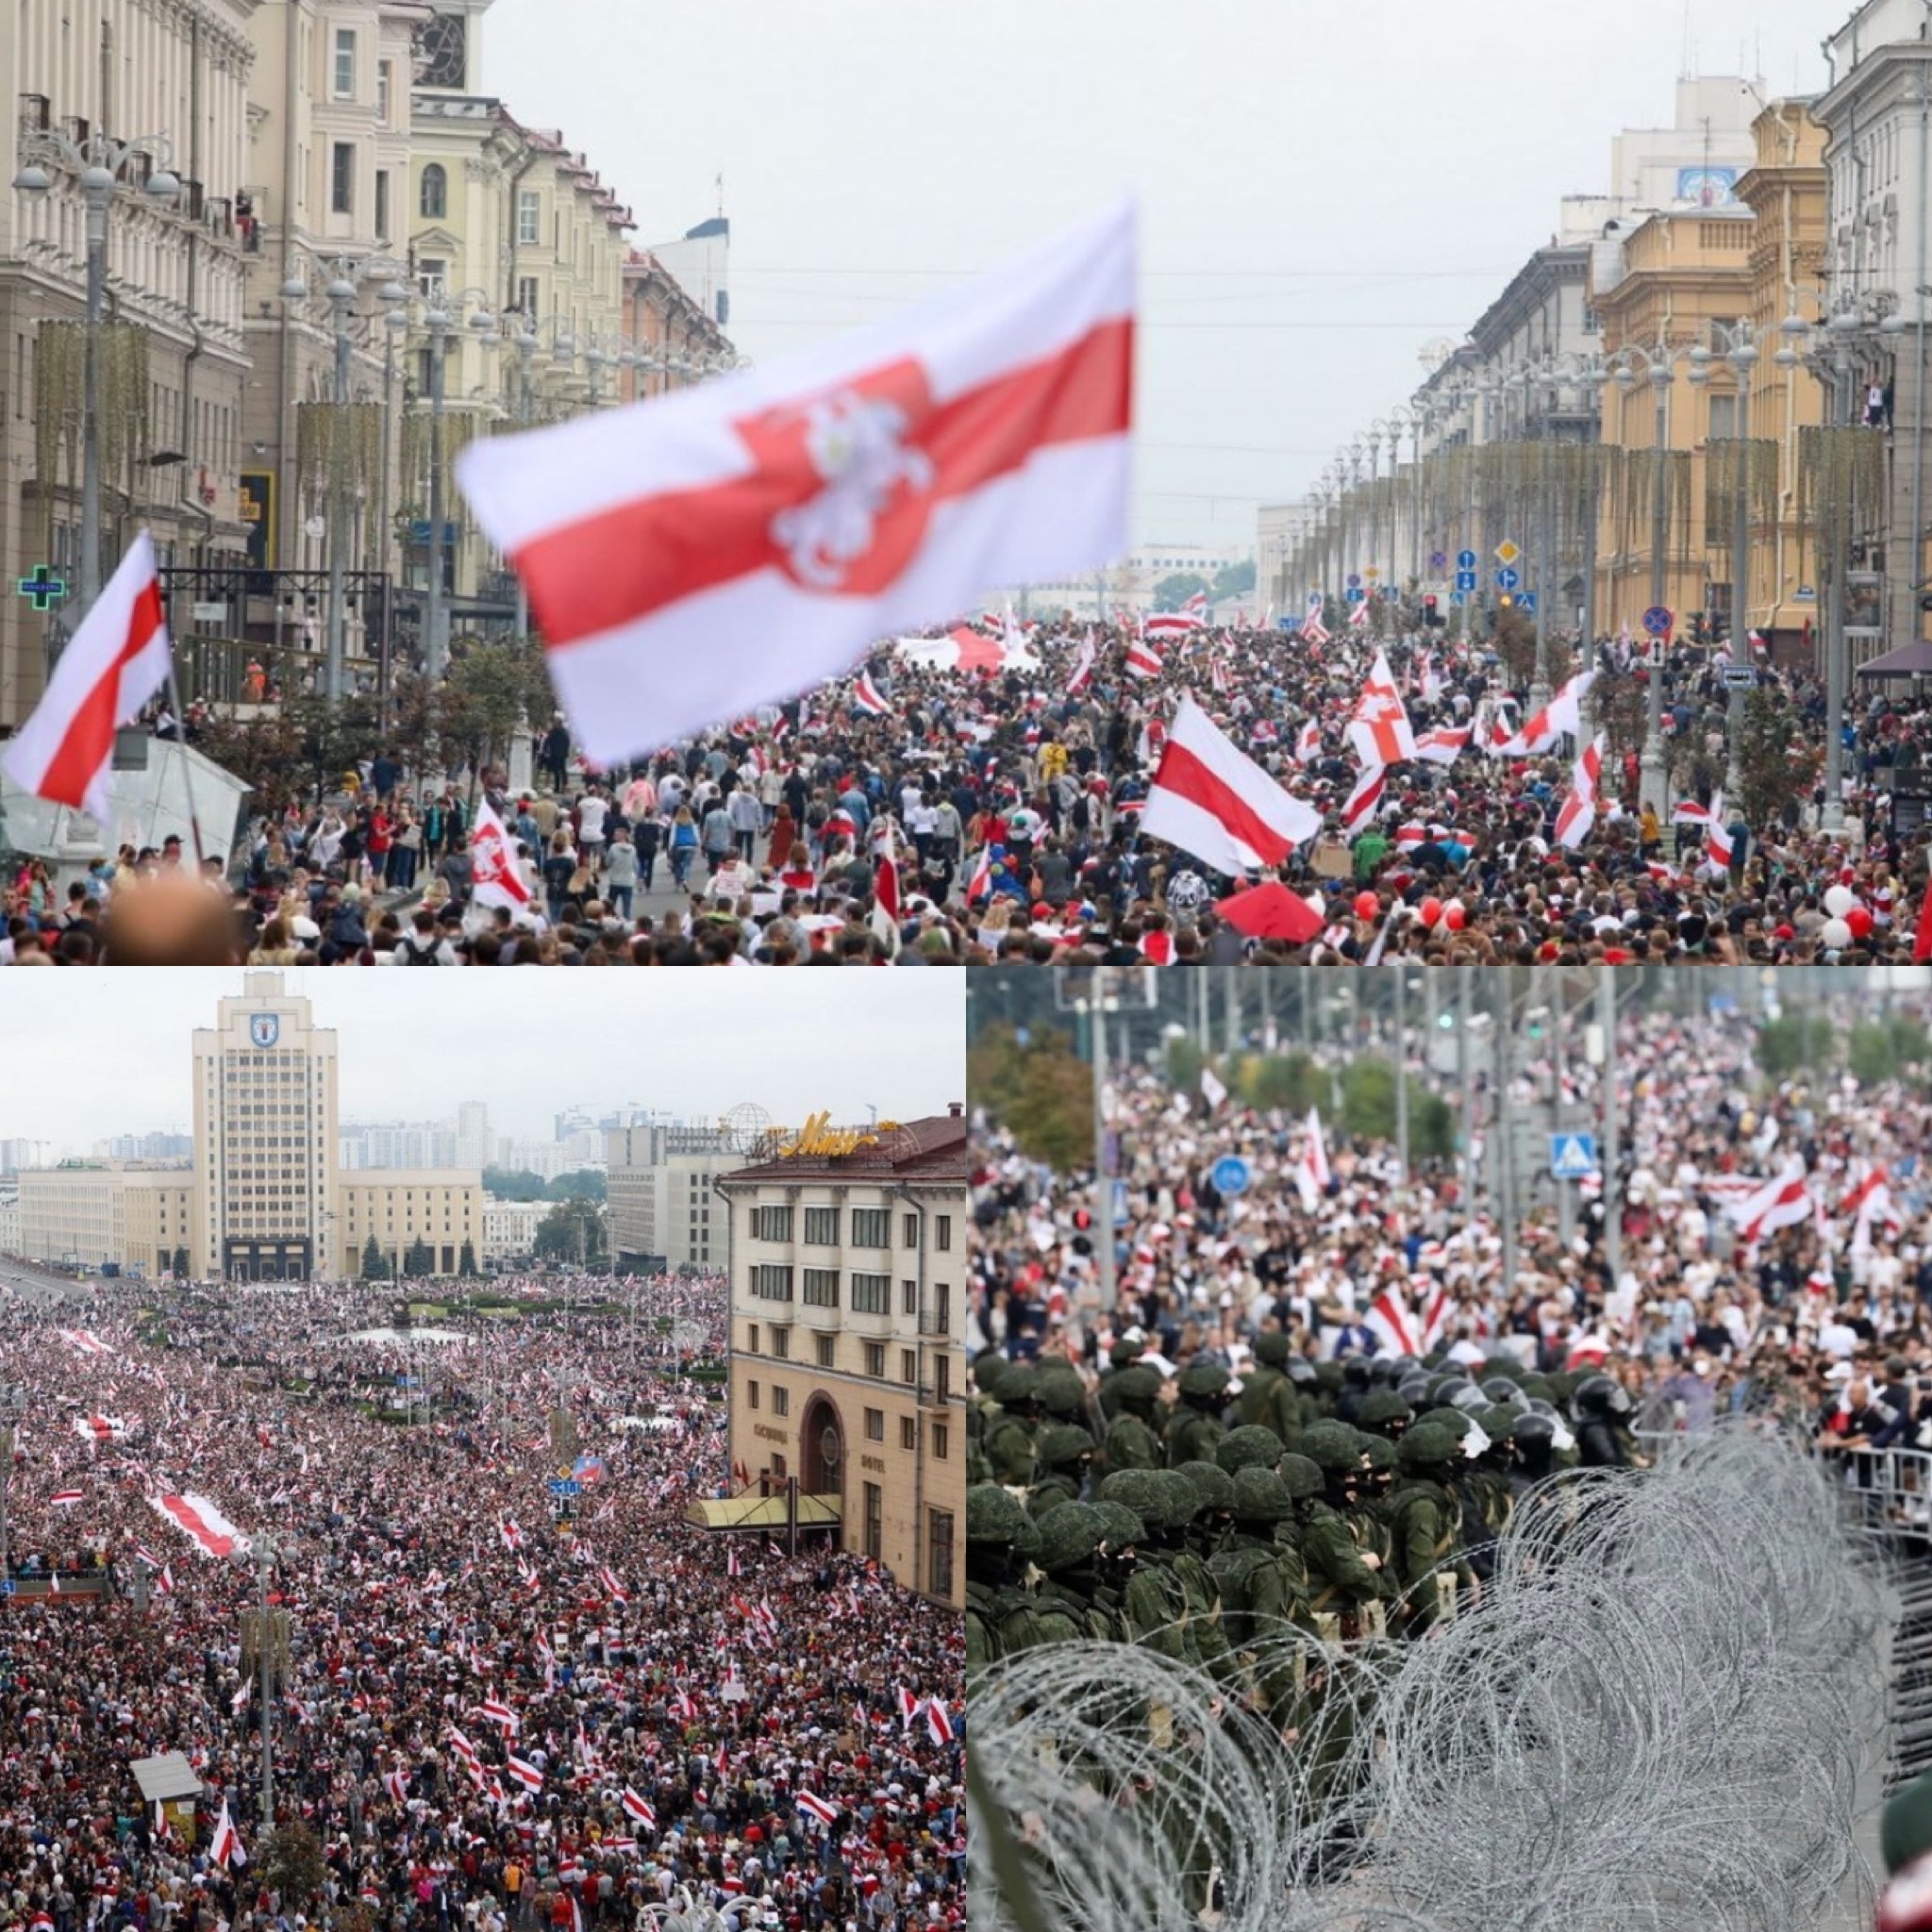 Last year, we saw a million people on the streets of Belarus. Those people have not disappeared, their opinion of Lukashenka did not change (Images from August 23, 30 protests in 2020).